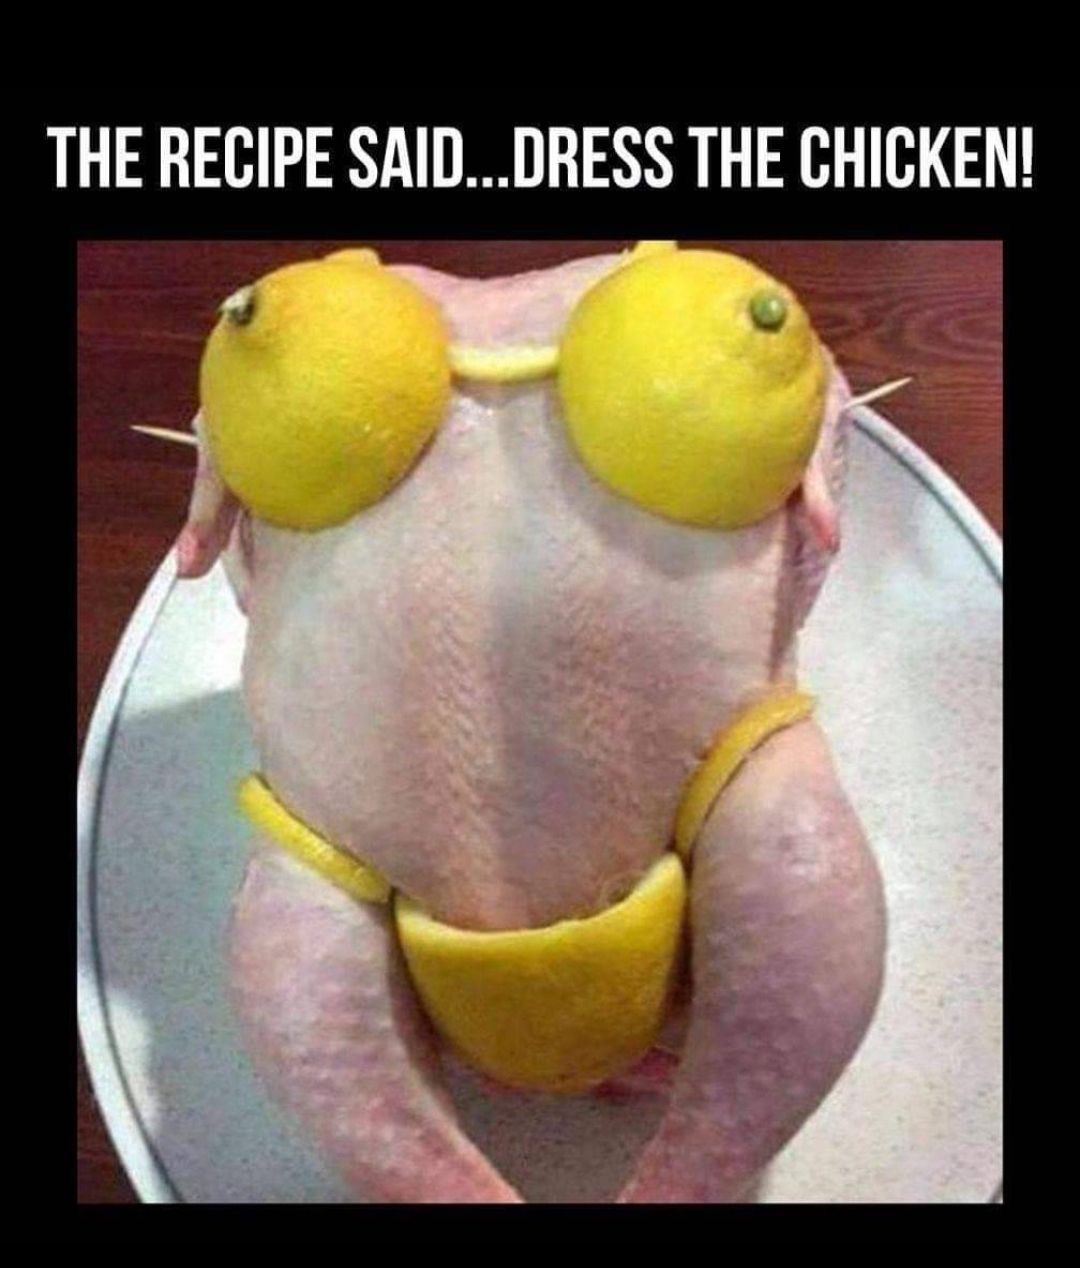 humpday meme - recipe said dress the chicken - The Recipe Said...Dress The Chicken!